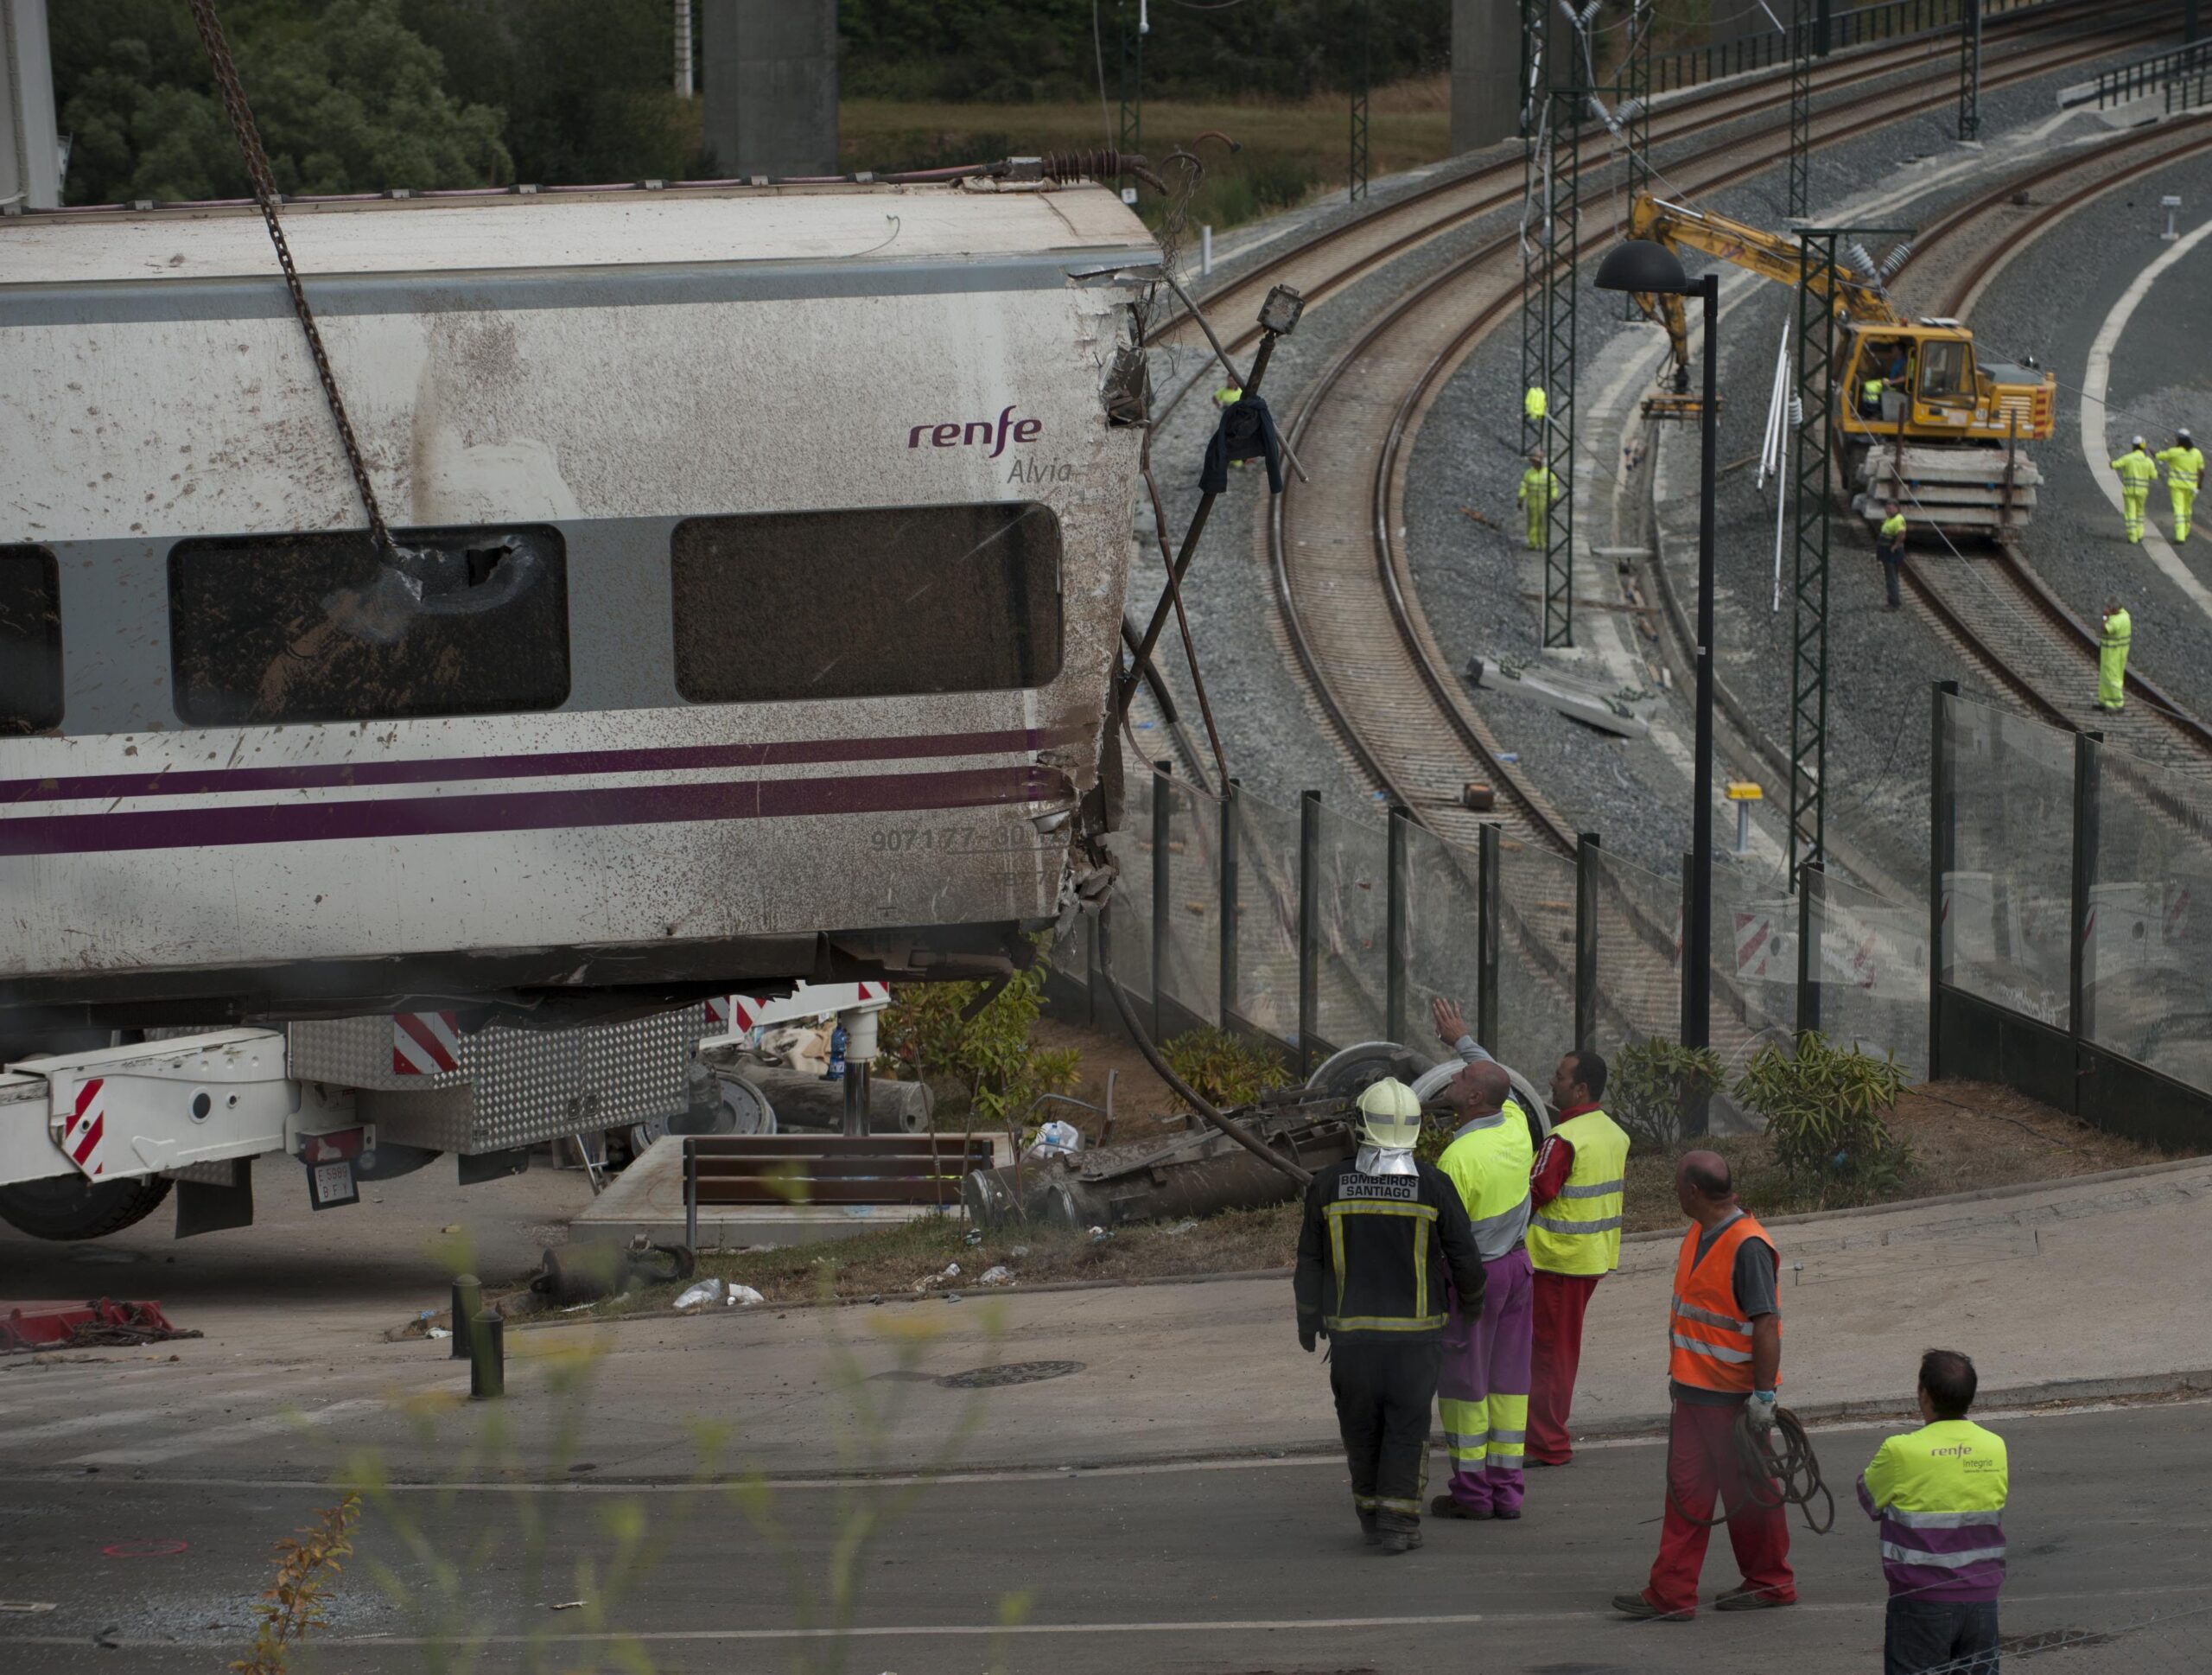 Train driver and rail safety chief get 30-month prison sentences for causing high-speed derailment in Spain- killing 80 people and causing dozens of serious injuries